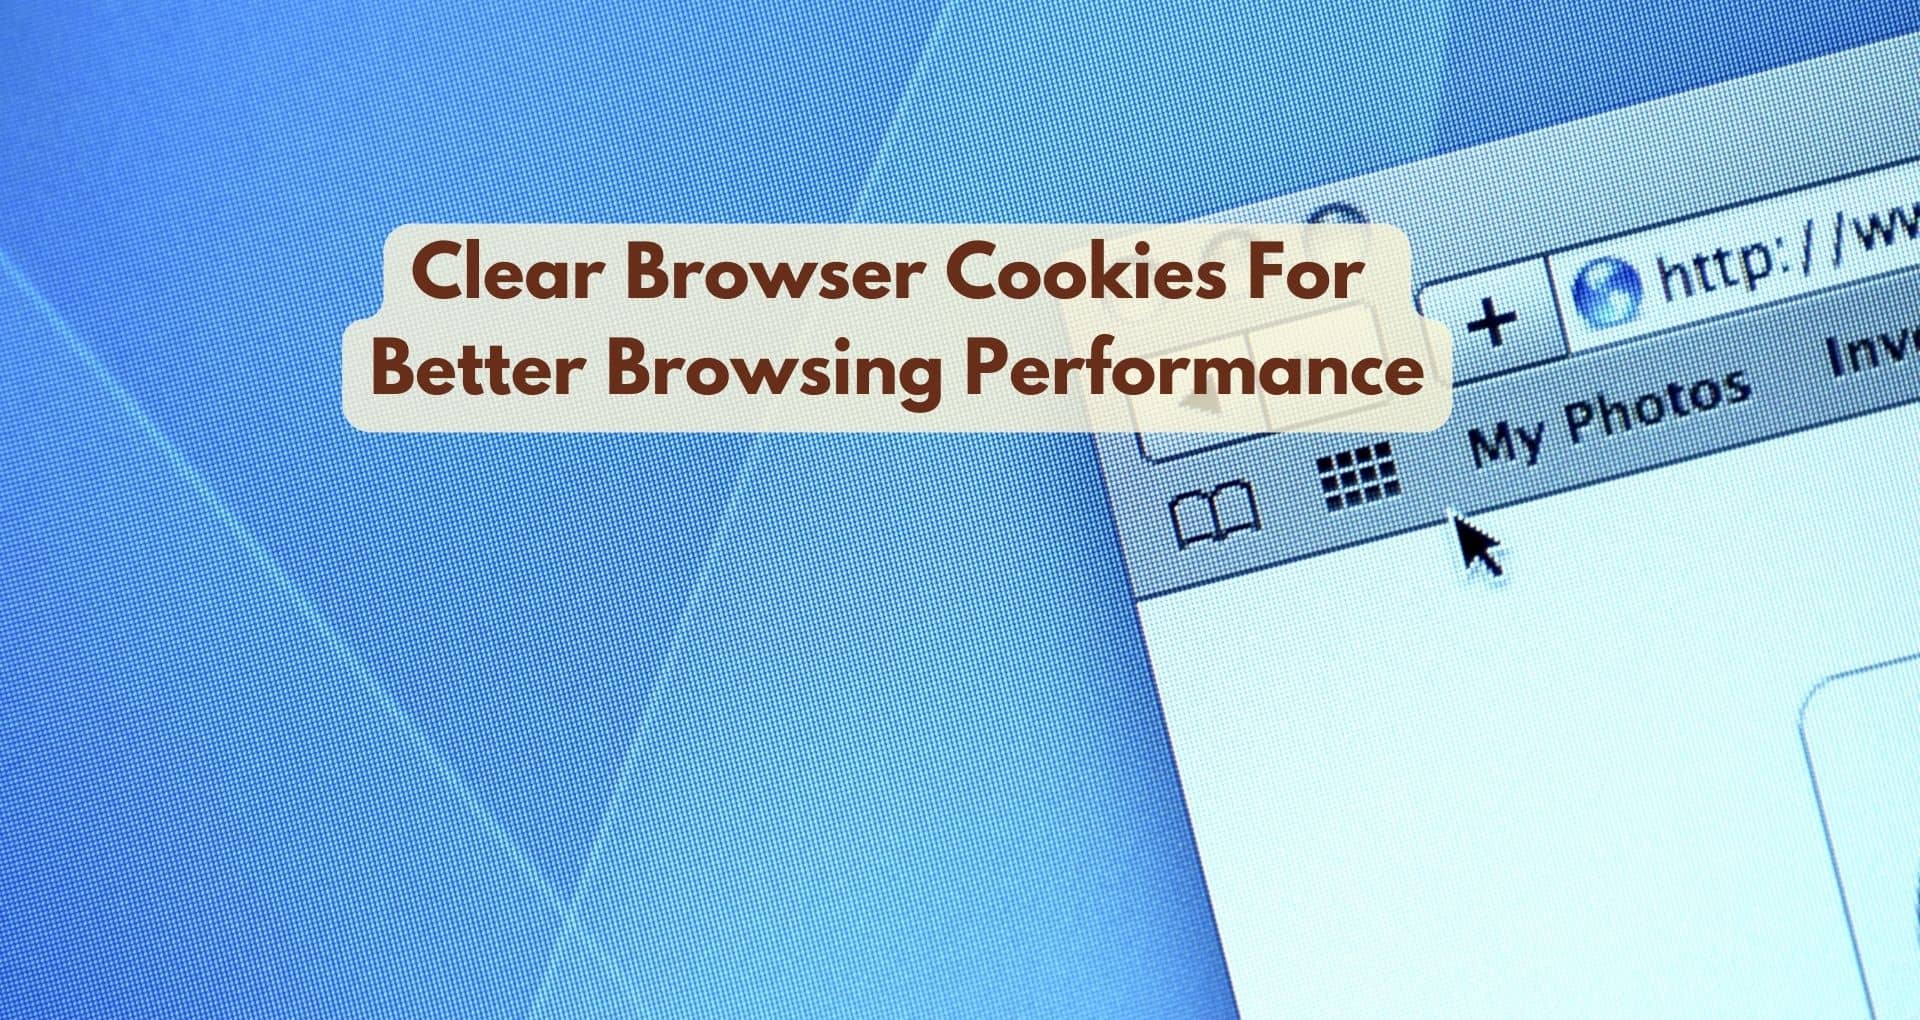 How To Clear Browser Cookies For Better Browsing Performance?